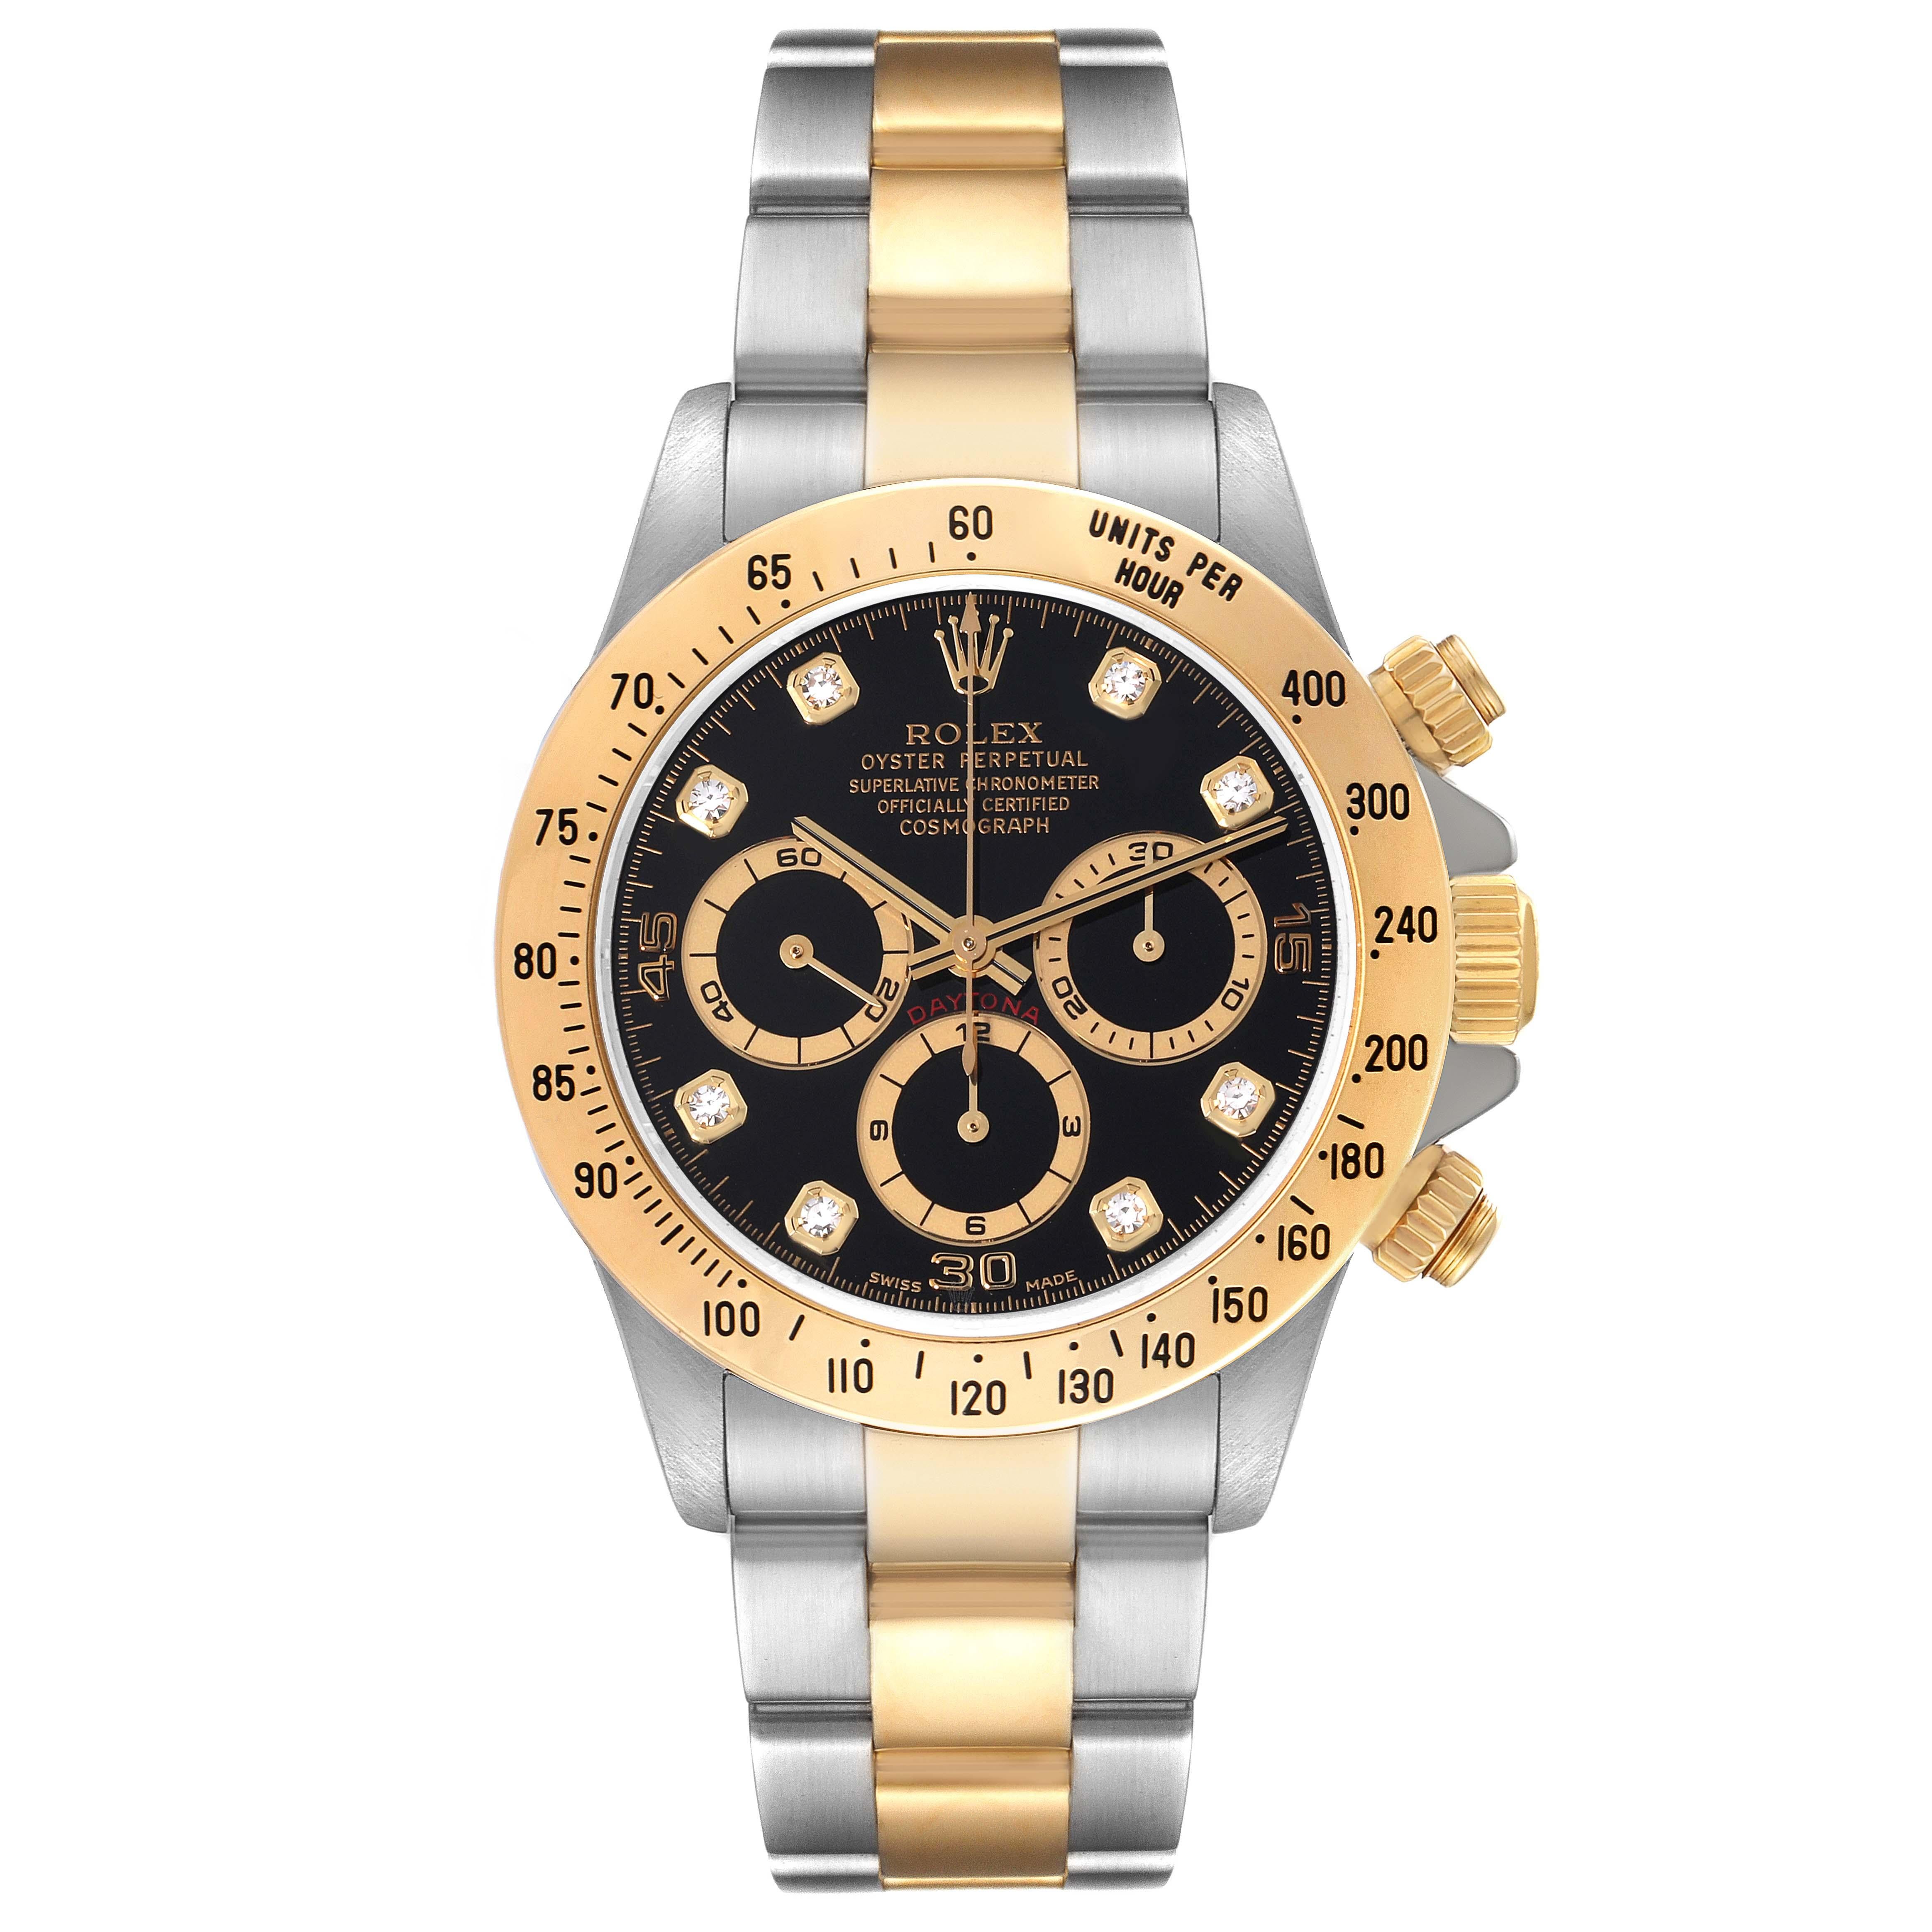 Rolex Daytona Steel Yellow Gold Diamond Dial Zenith Movement Mens Watch 16523. Officially certified chronometer automatic self-winding movement. Zenith based chronograph. Stainless steel and 18K yellow gold case 40.0 mm in diameter. Special